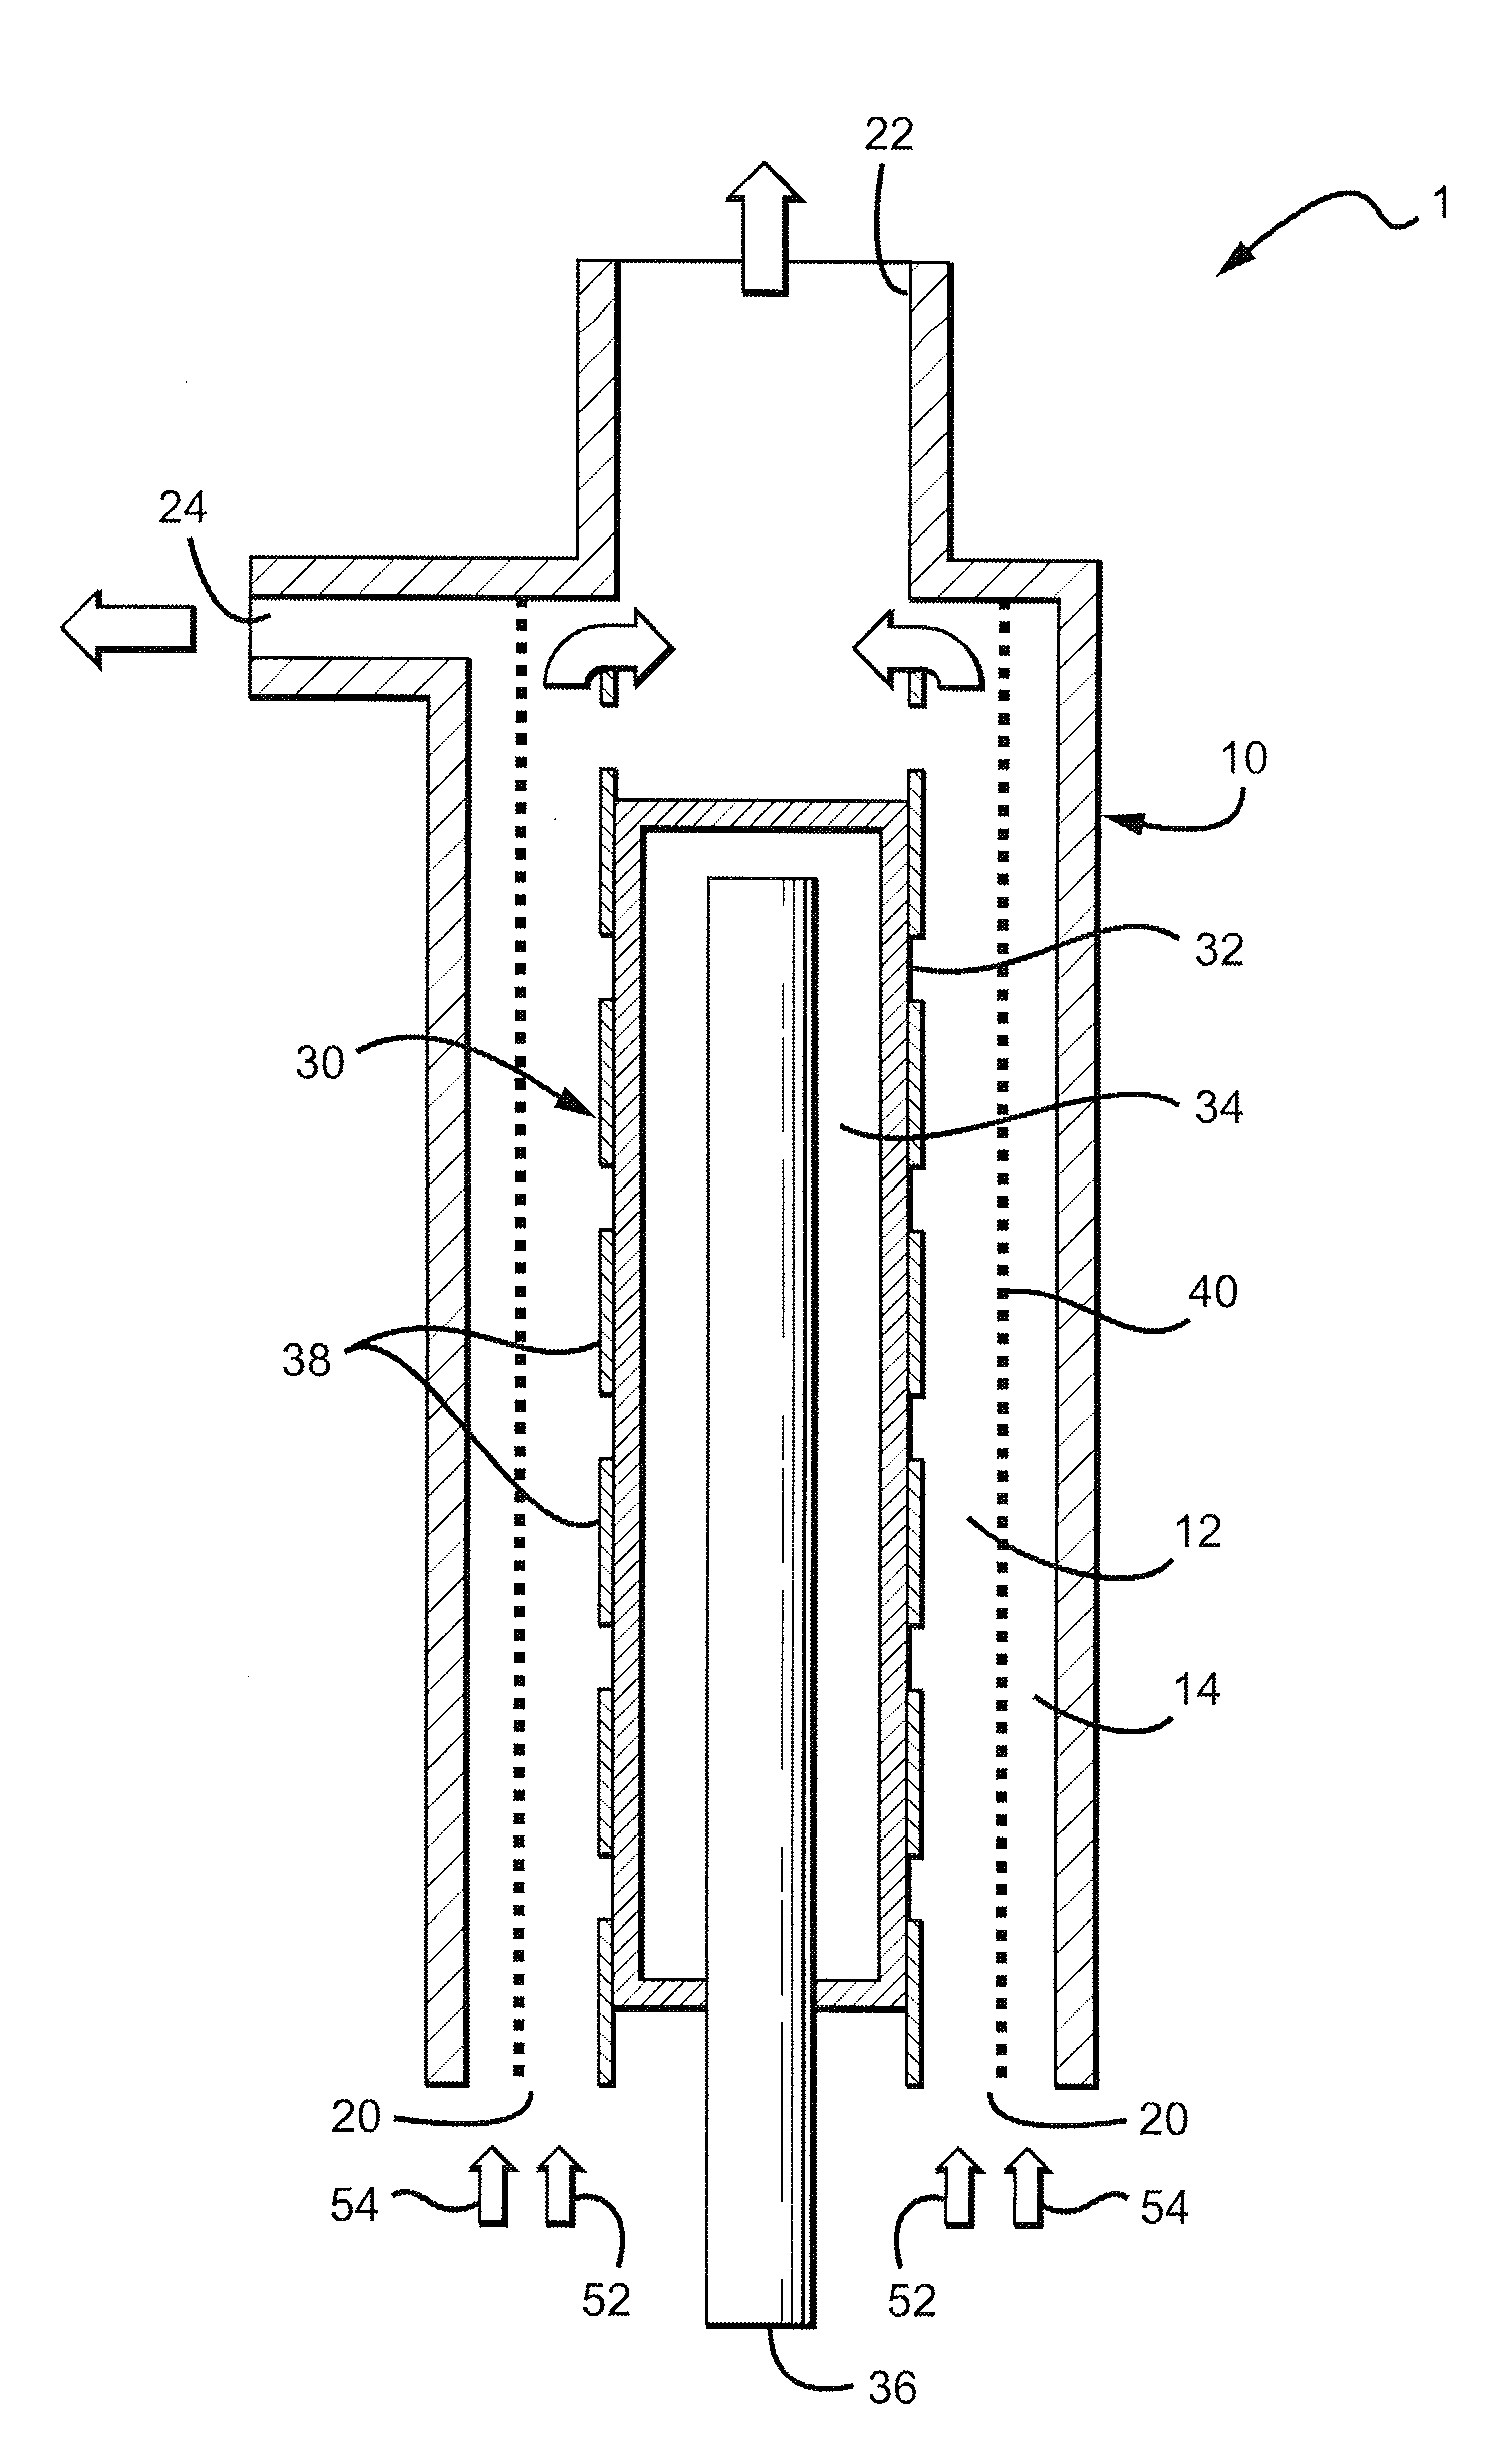 Activated water apparatus and methods